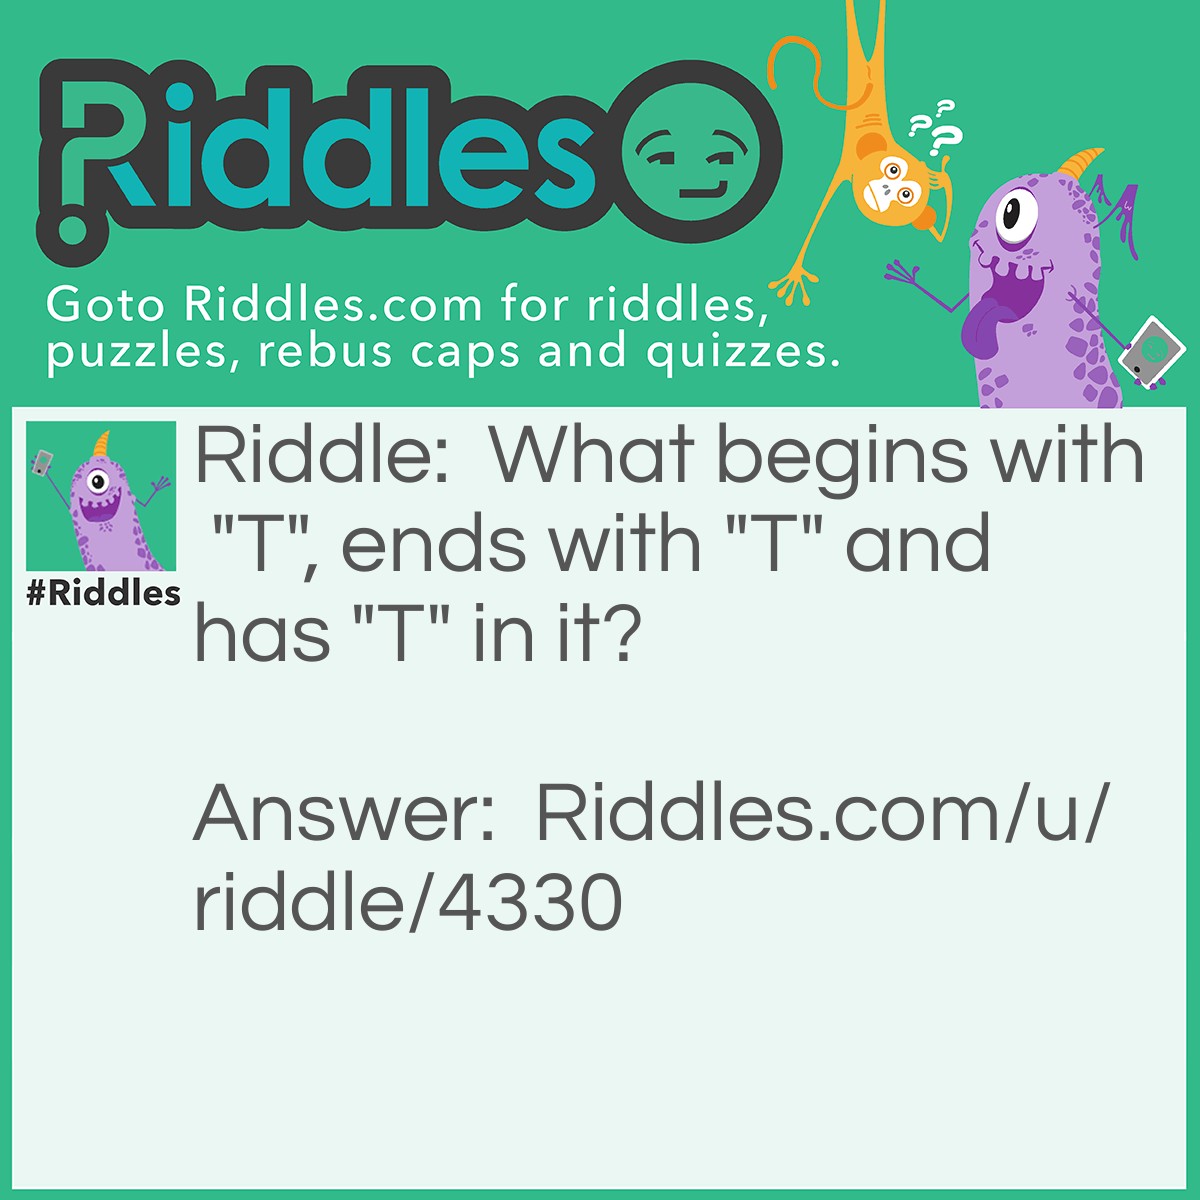 Riddle: What begins with "T", ends with "T" and has "T" in it? Answer: A teapot.